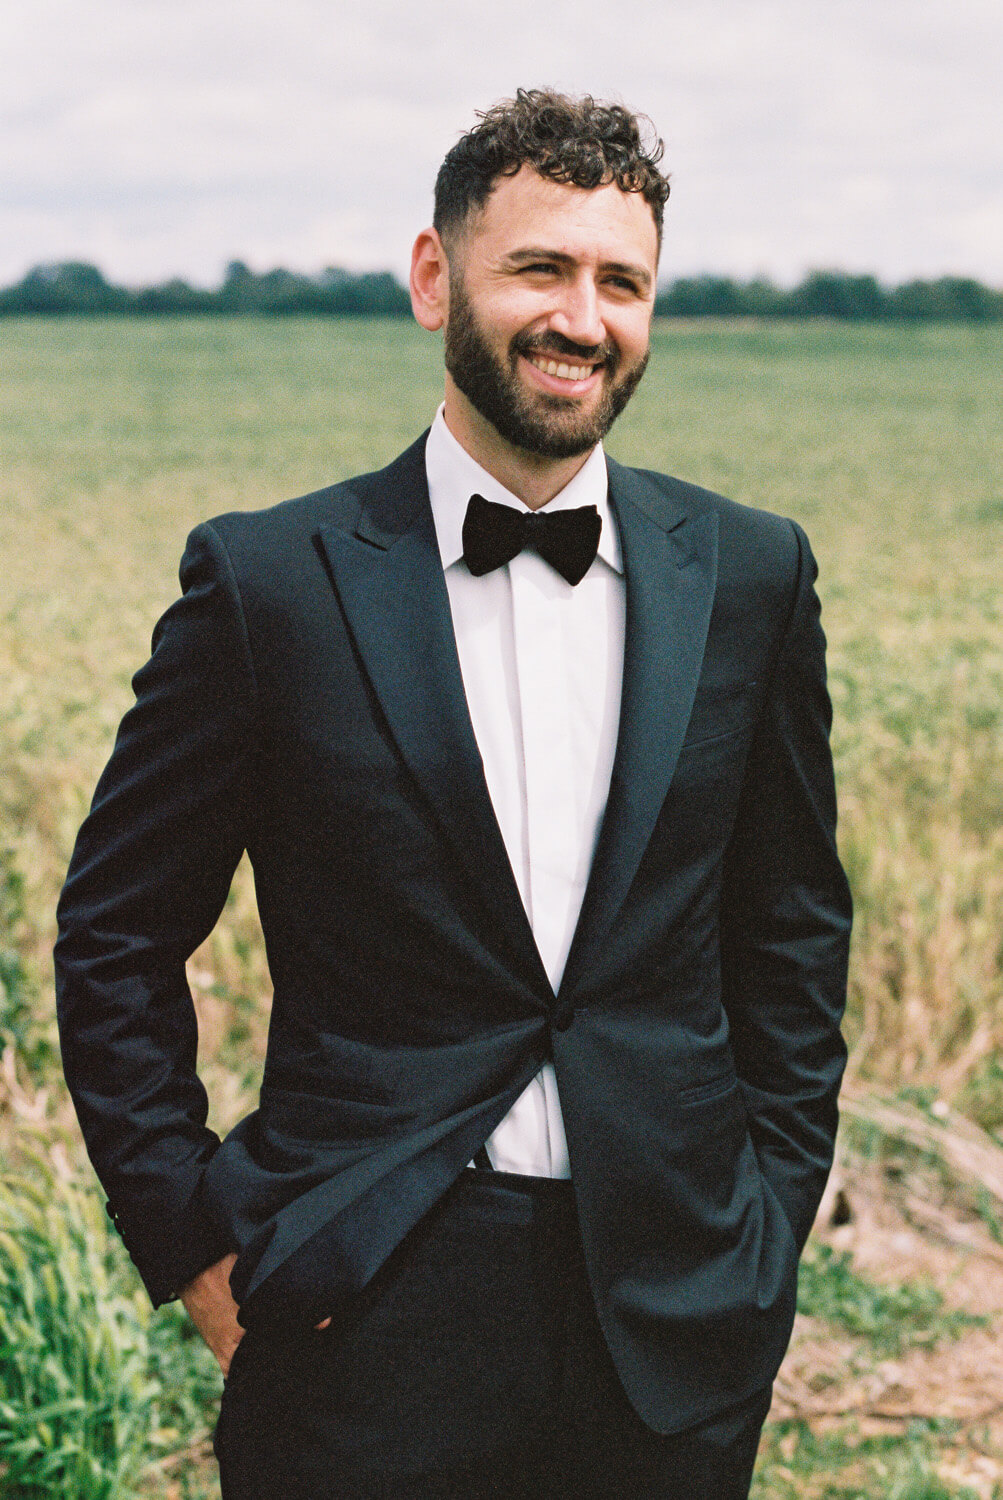 Groom in black tux and bowtie